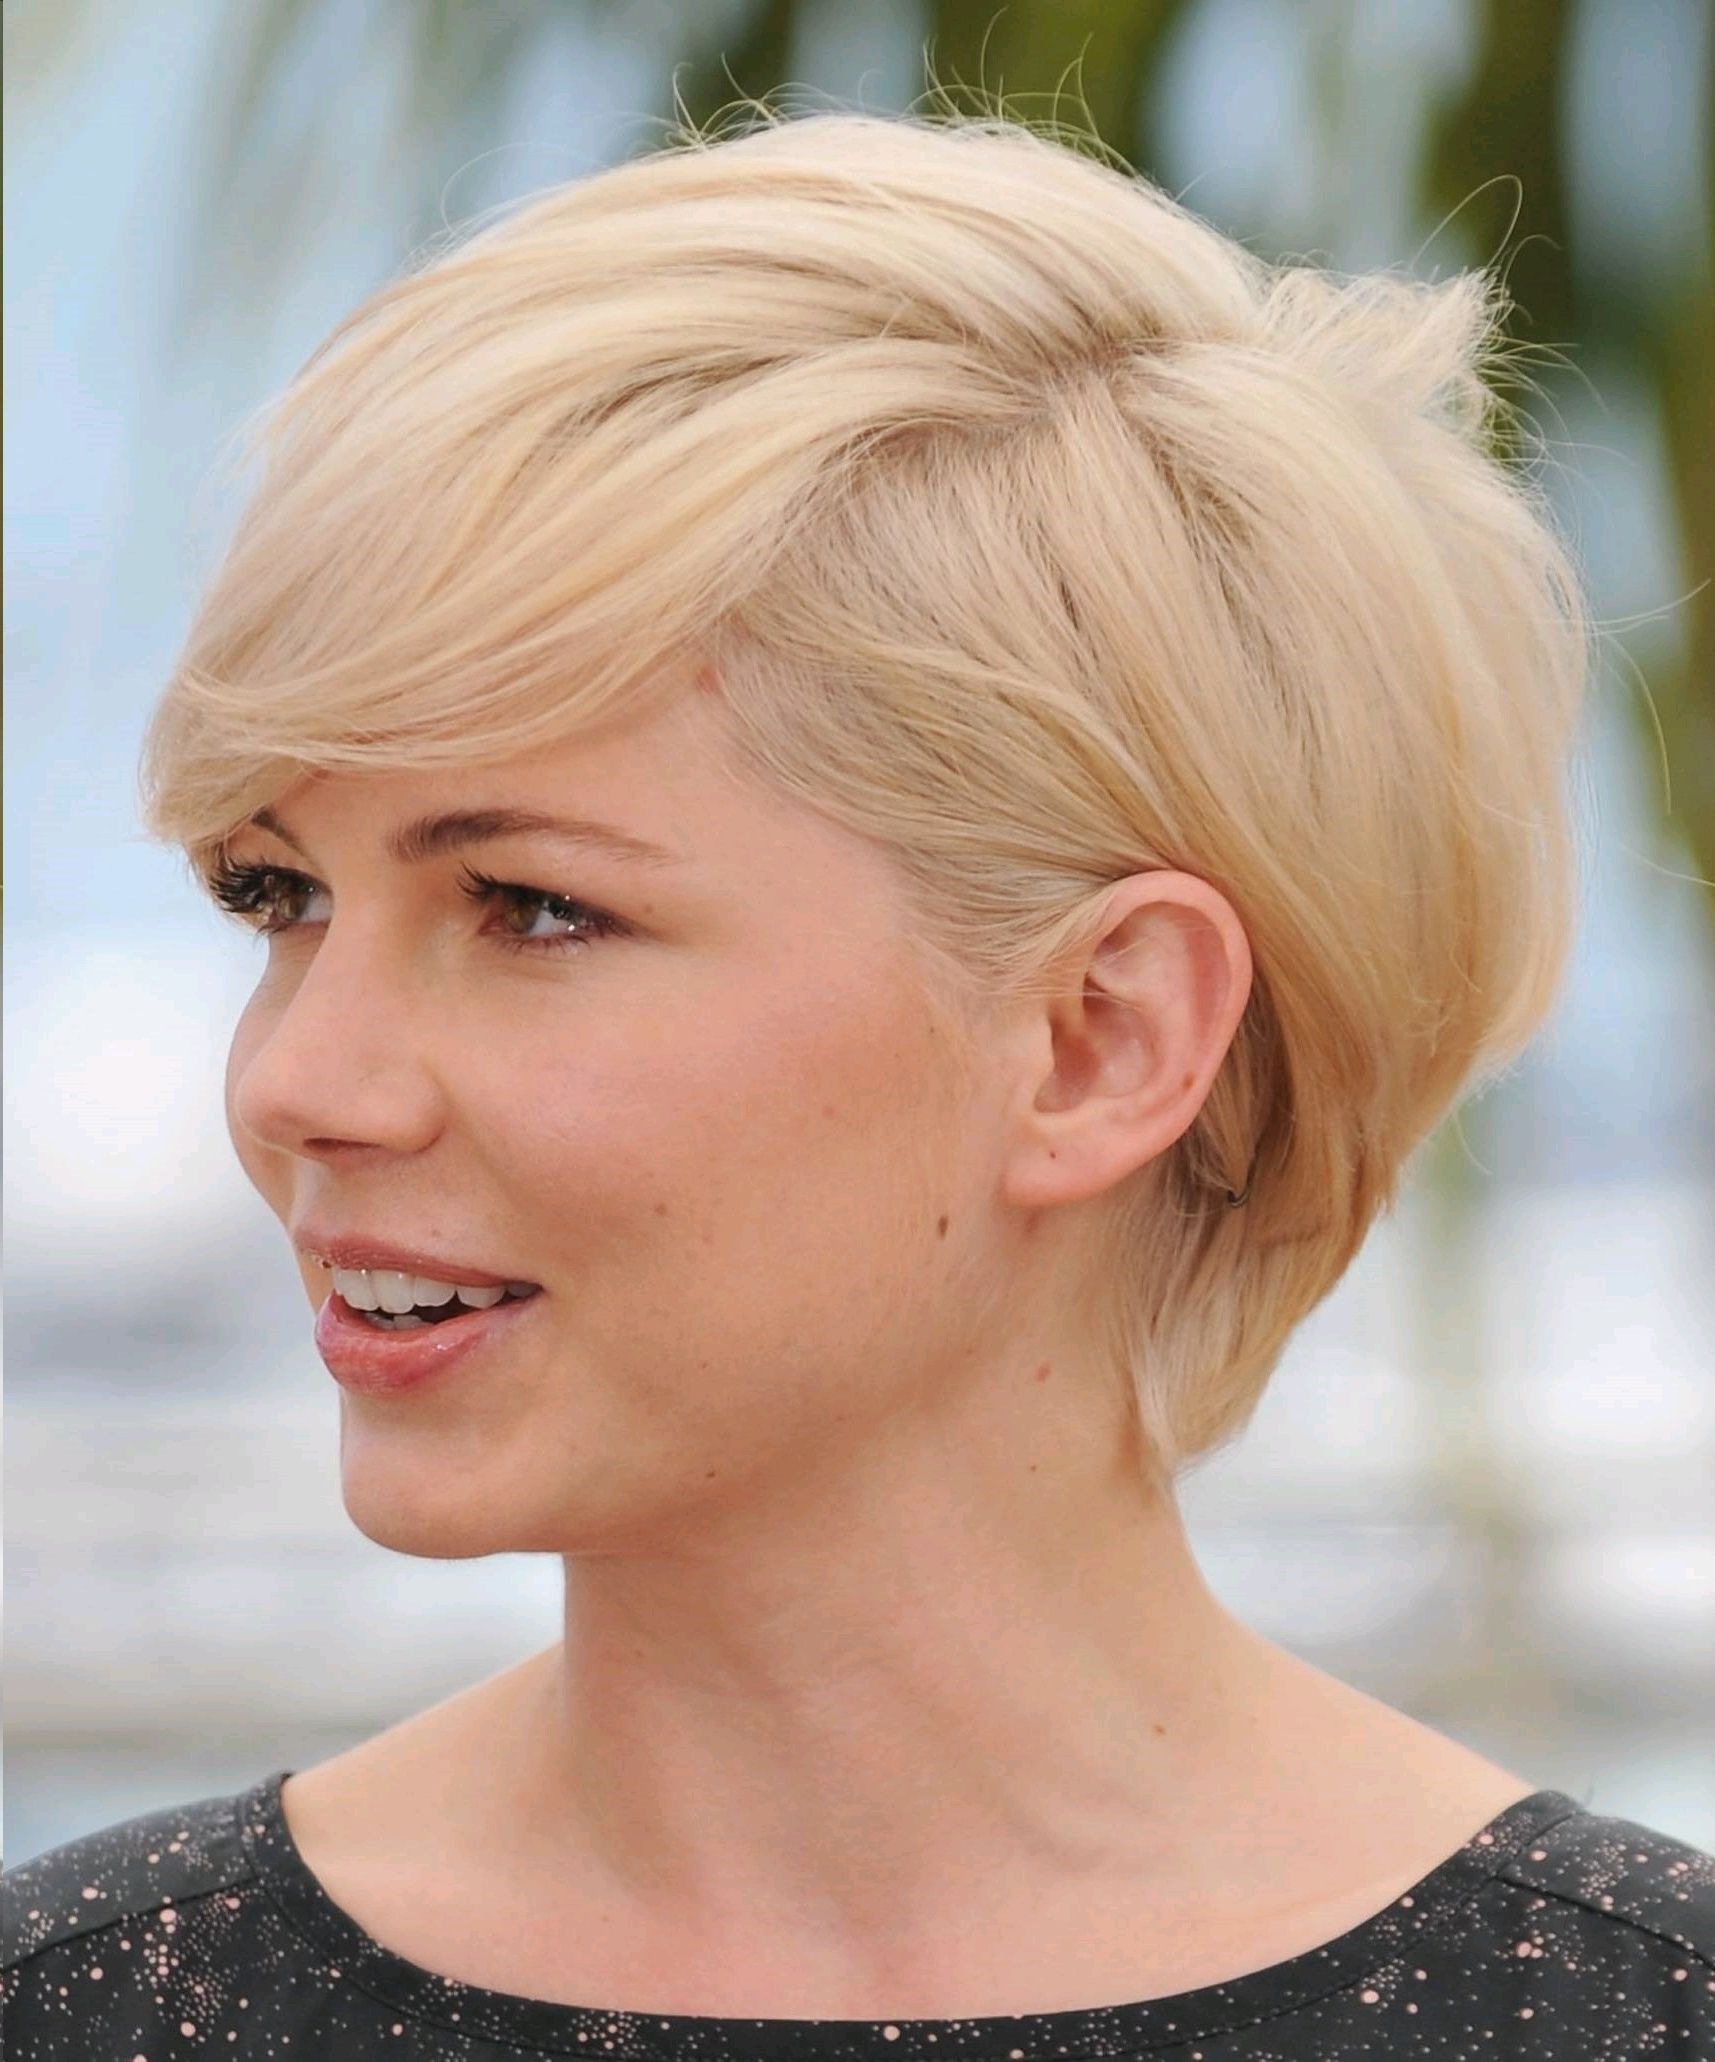 Short Hairstyles: Top 10 Collection Short Celebrity Hairstyles Inside Newest Famous Pixie Hairstyles (View 9 of 15)